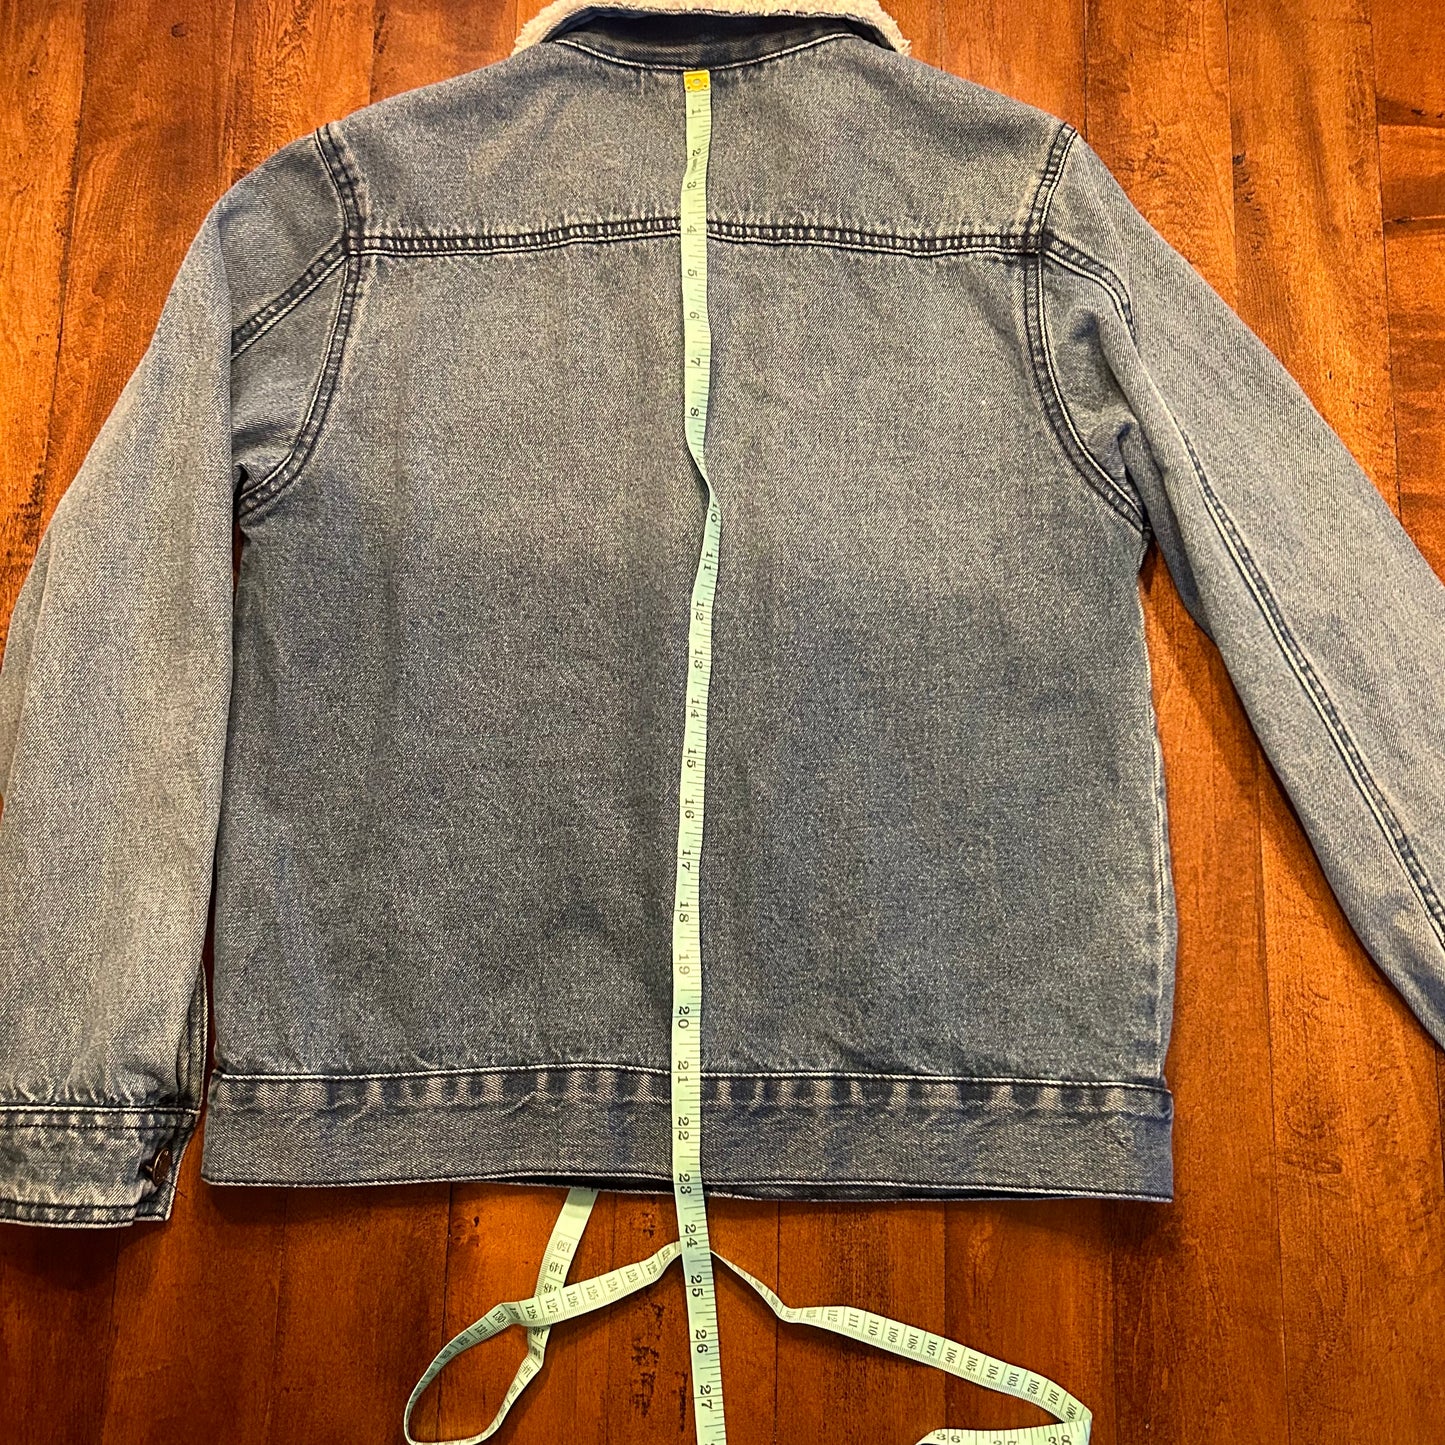 Vintage Simply Styled By Sears Jean Jacket Size S/M